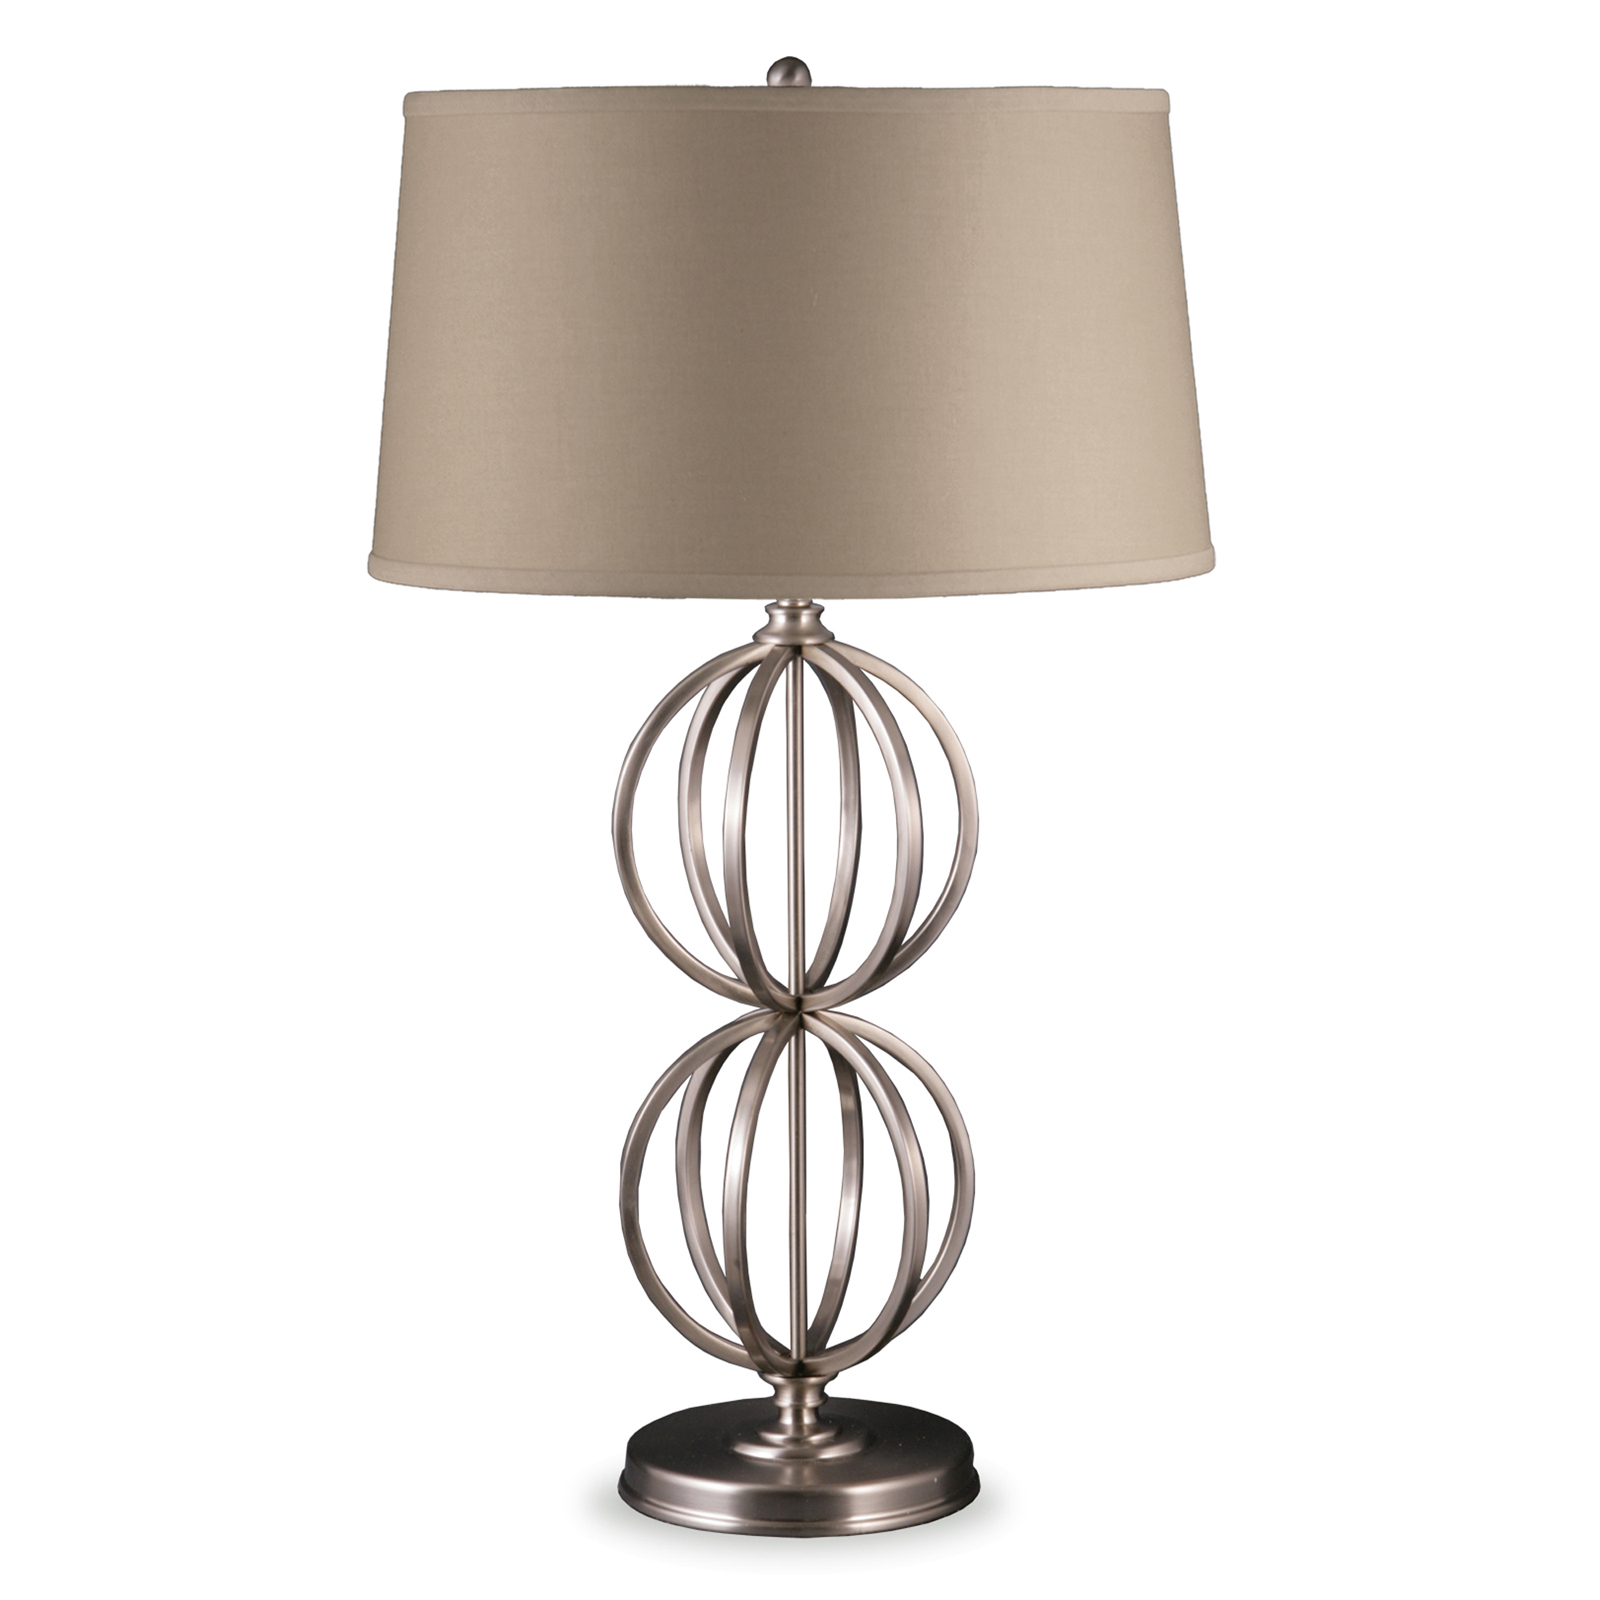 31 Inch Brushed Nickel Double Ball Metal Table Lamp